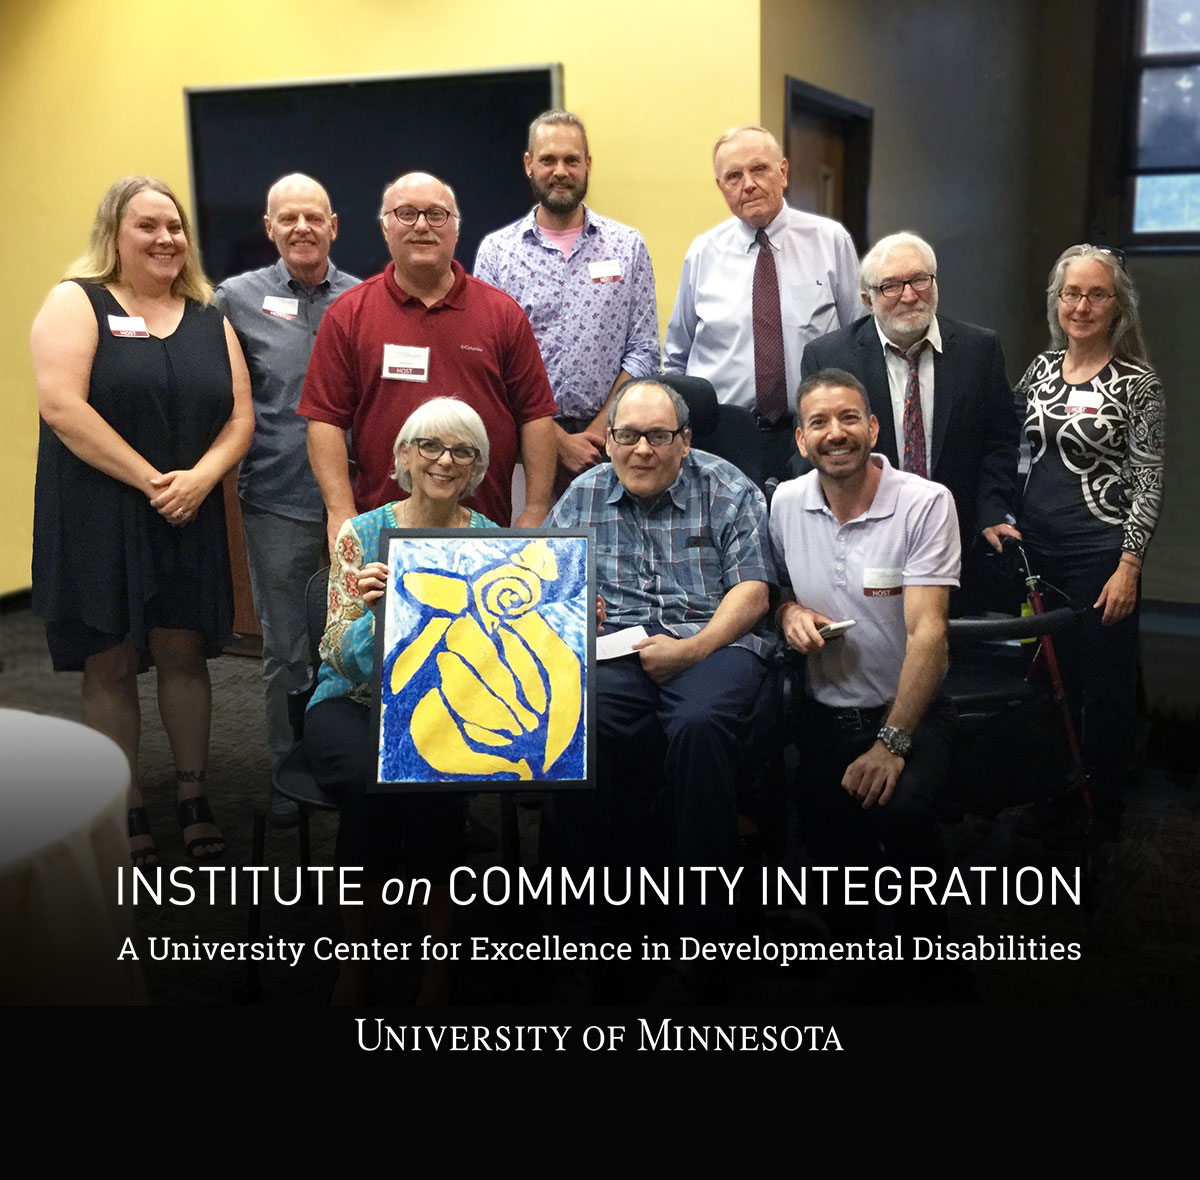 The Institute on Community Integration (ICI) a University Center for Excellence in Developmental Disabilities at the University of Minnesota. The work of artist Jon Leverentz (front center) was featured in the summer 2017 exhibit of ICI’s Changing Landscapes initiative. Since 2007 Changing Landscapes has partnered with over a dozen community organizations to present exhibits of visual art by artists with disabilities, celebrating art and diversity while promoting the work of the artists. Pictured with Leverentz are members of the Changing Landscapes committee, and ICI Director David R. Johnson (back right). In 2018, Changing Landscapes will have a new name – Art for All: The Stephanie Evelo Fund for Art Inclusion.